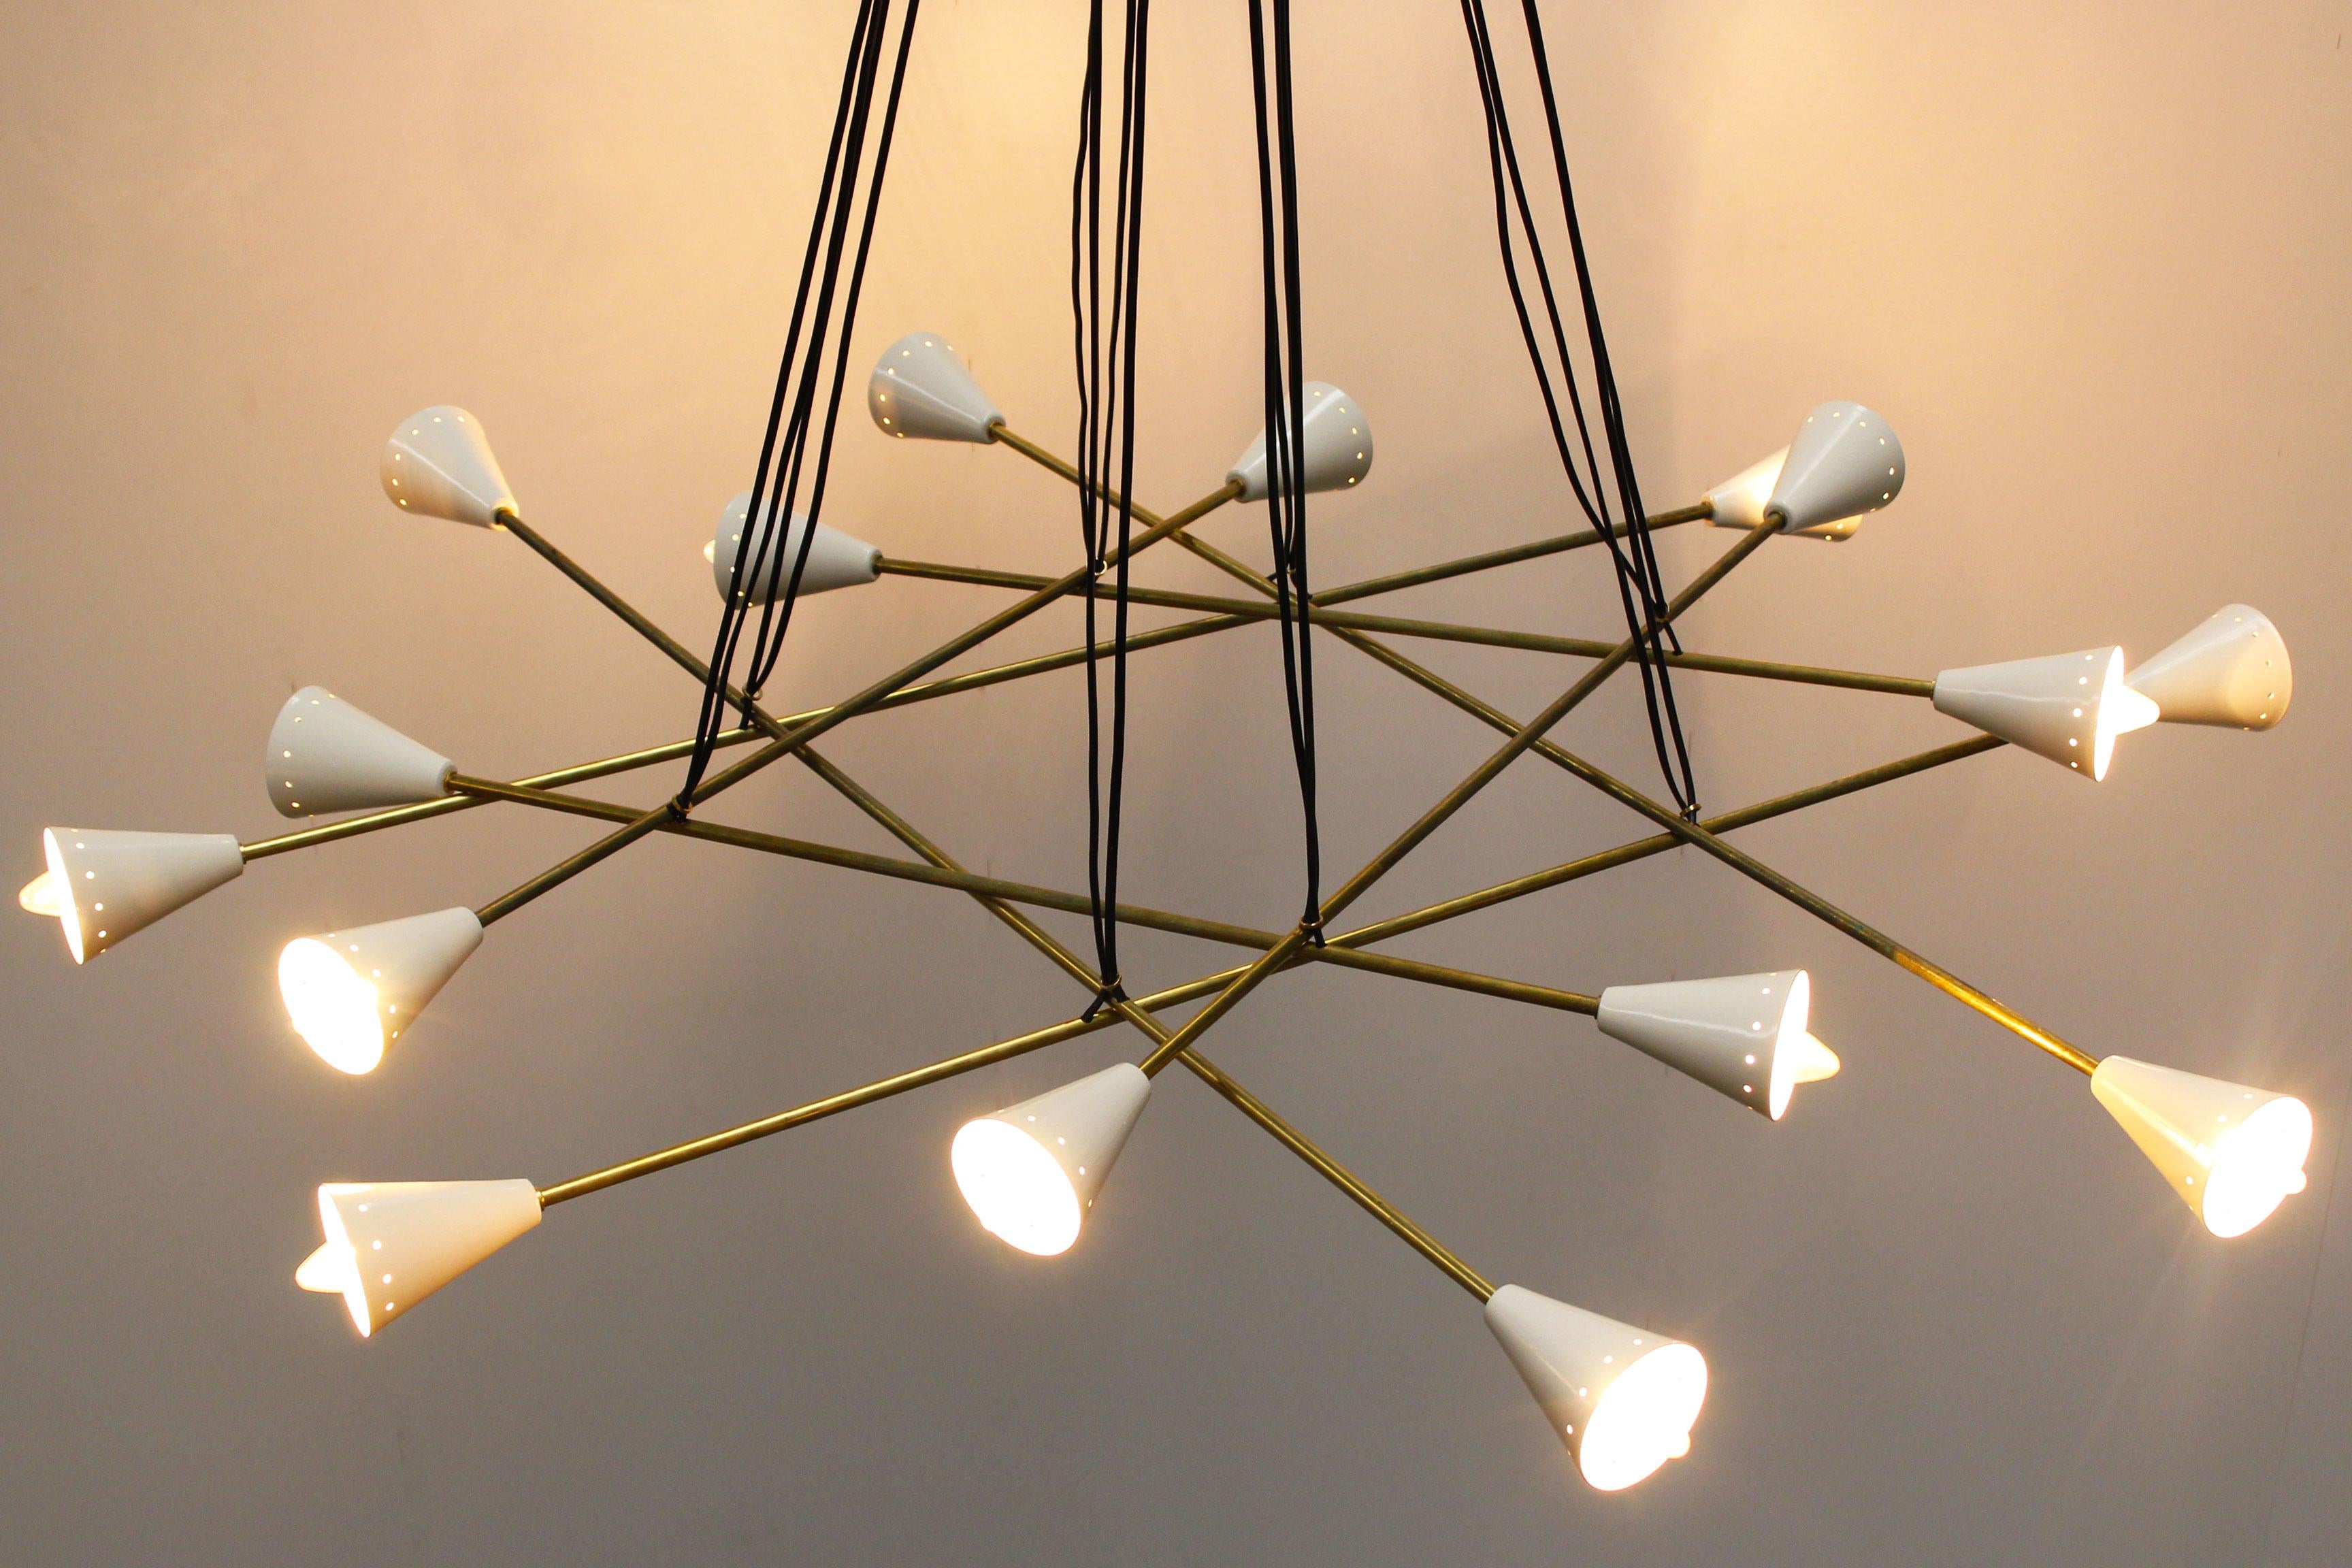 Massive cluster chandelier designed by Stilnovo with a diameter of 130 cm. The chandelier has 16 sockets, the chandelier has a brass frame and white metal shades hanging on black wires. Its Minimalistic shape make it great for any midcentury or